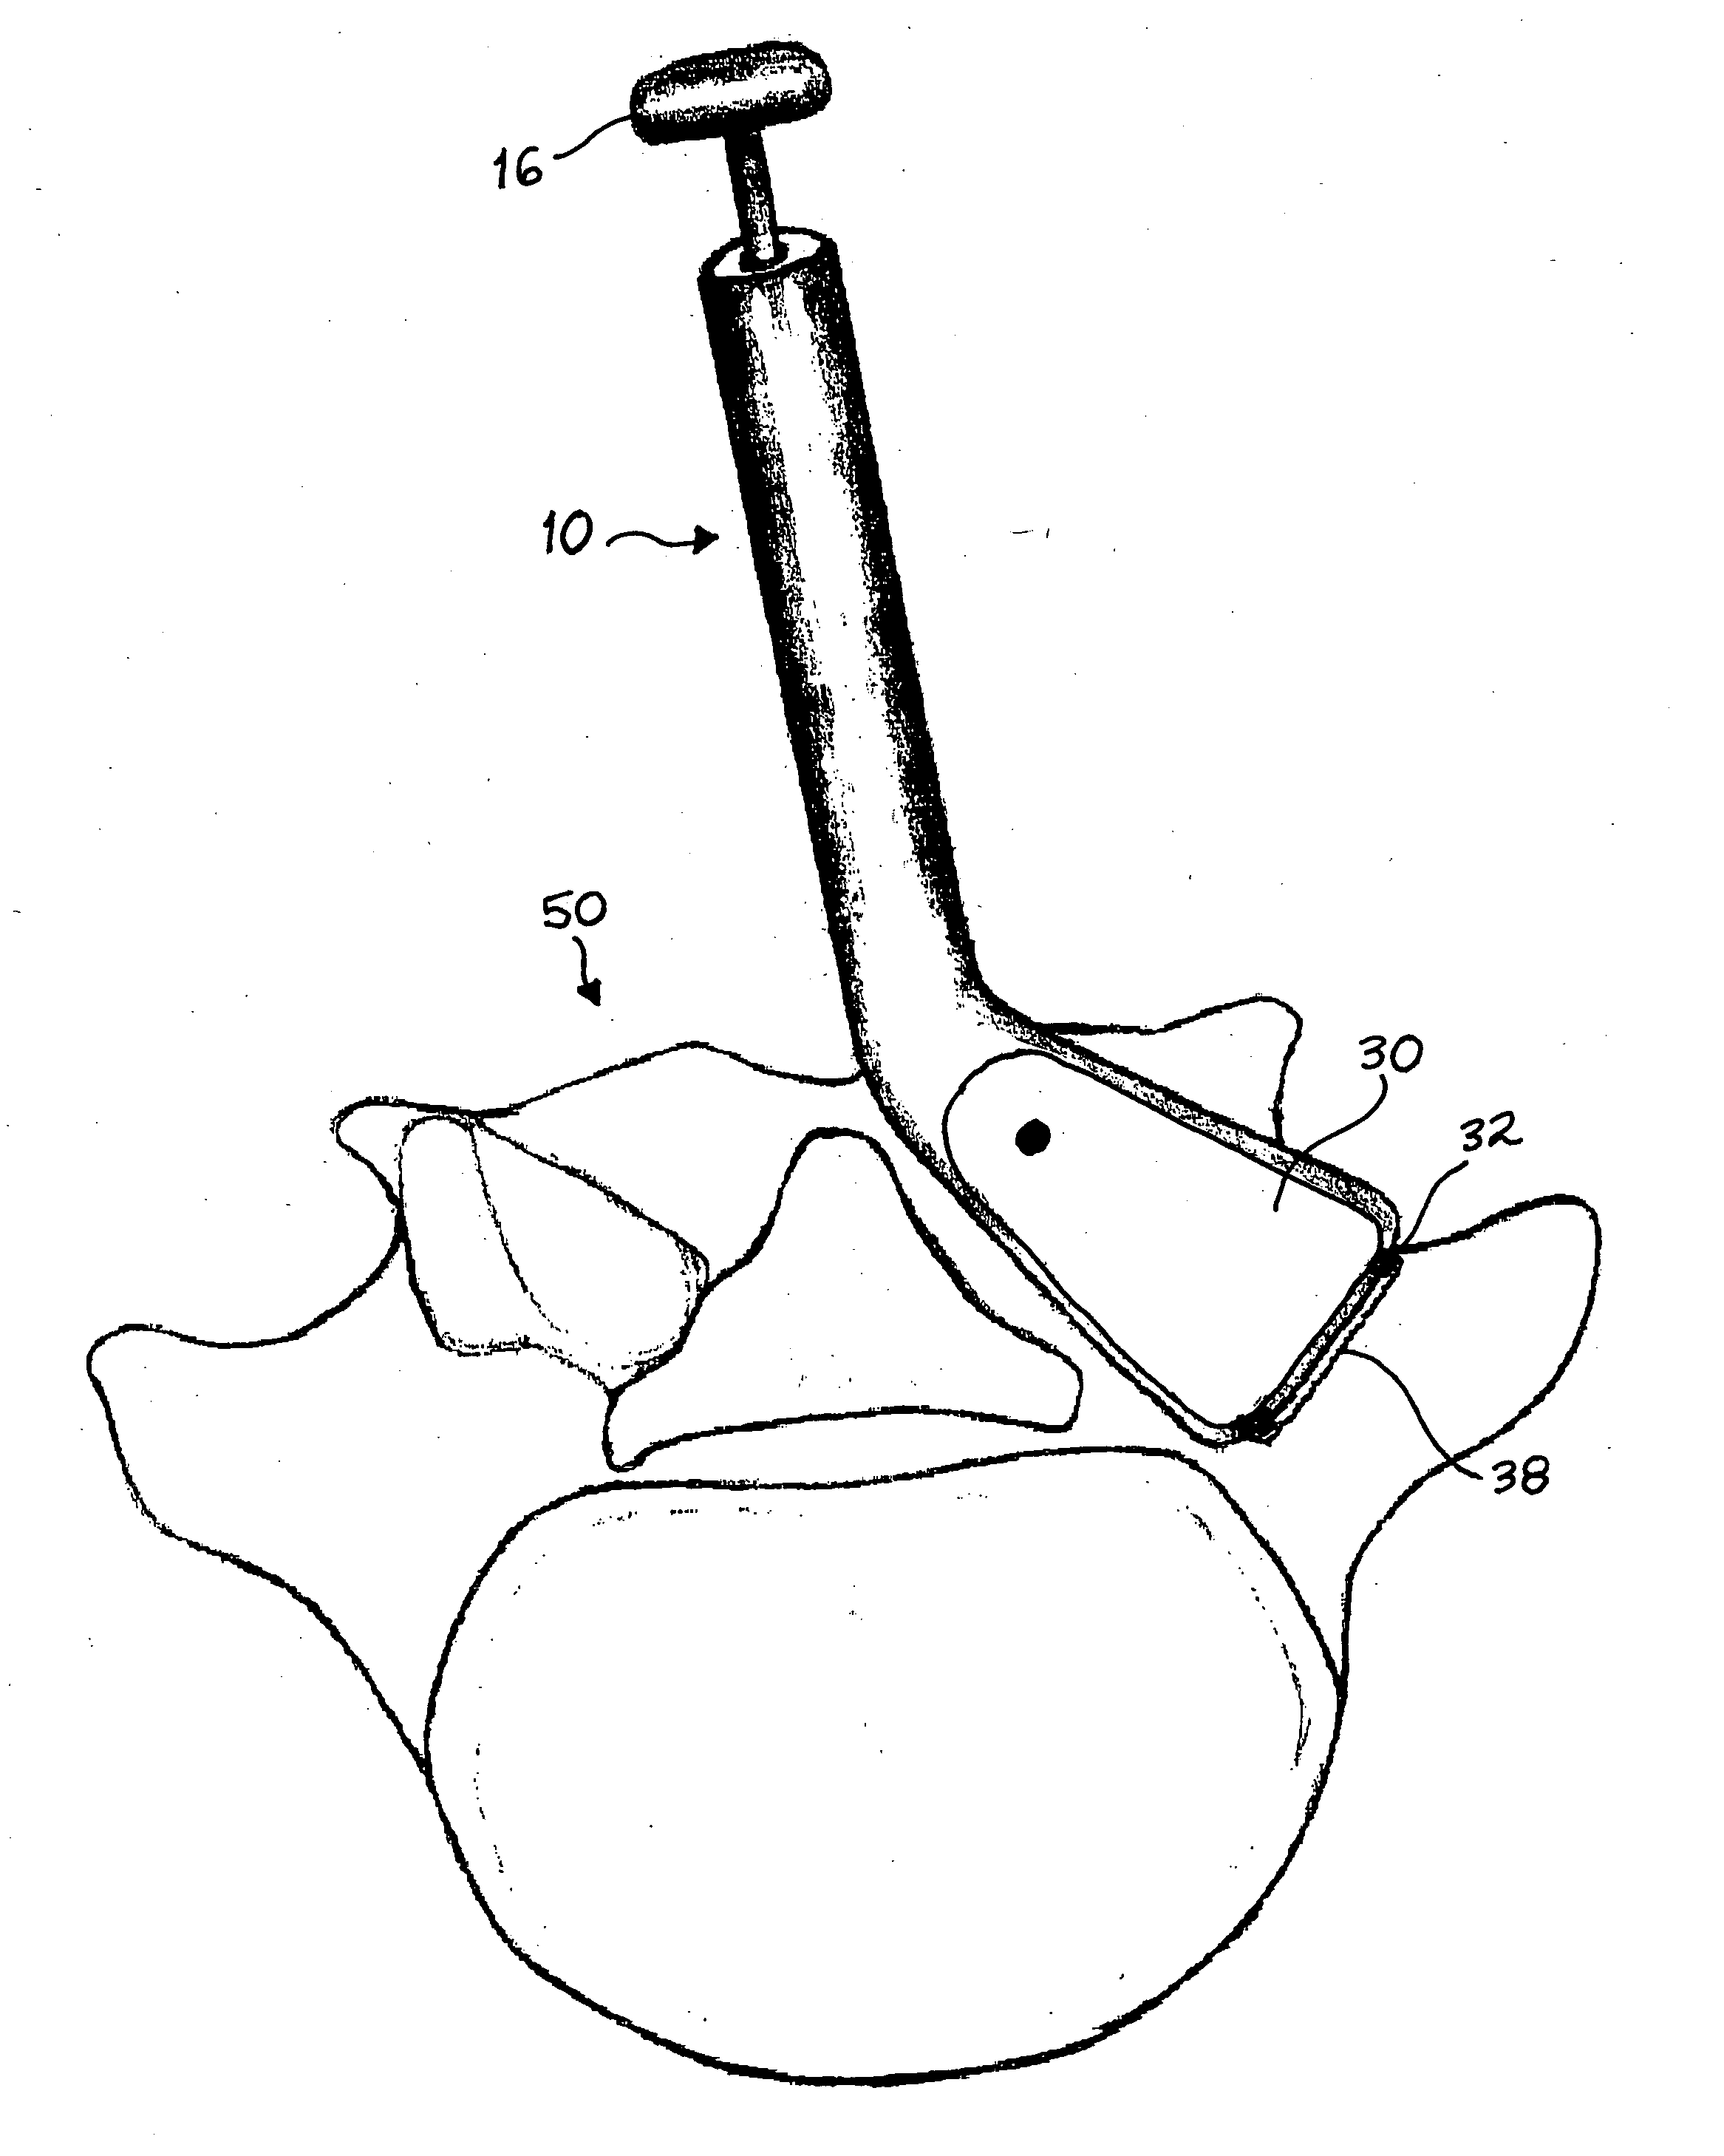 Devices for performing fusion surgery using a split thickness technique to provide vascularized autograft